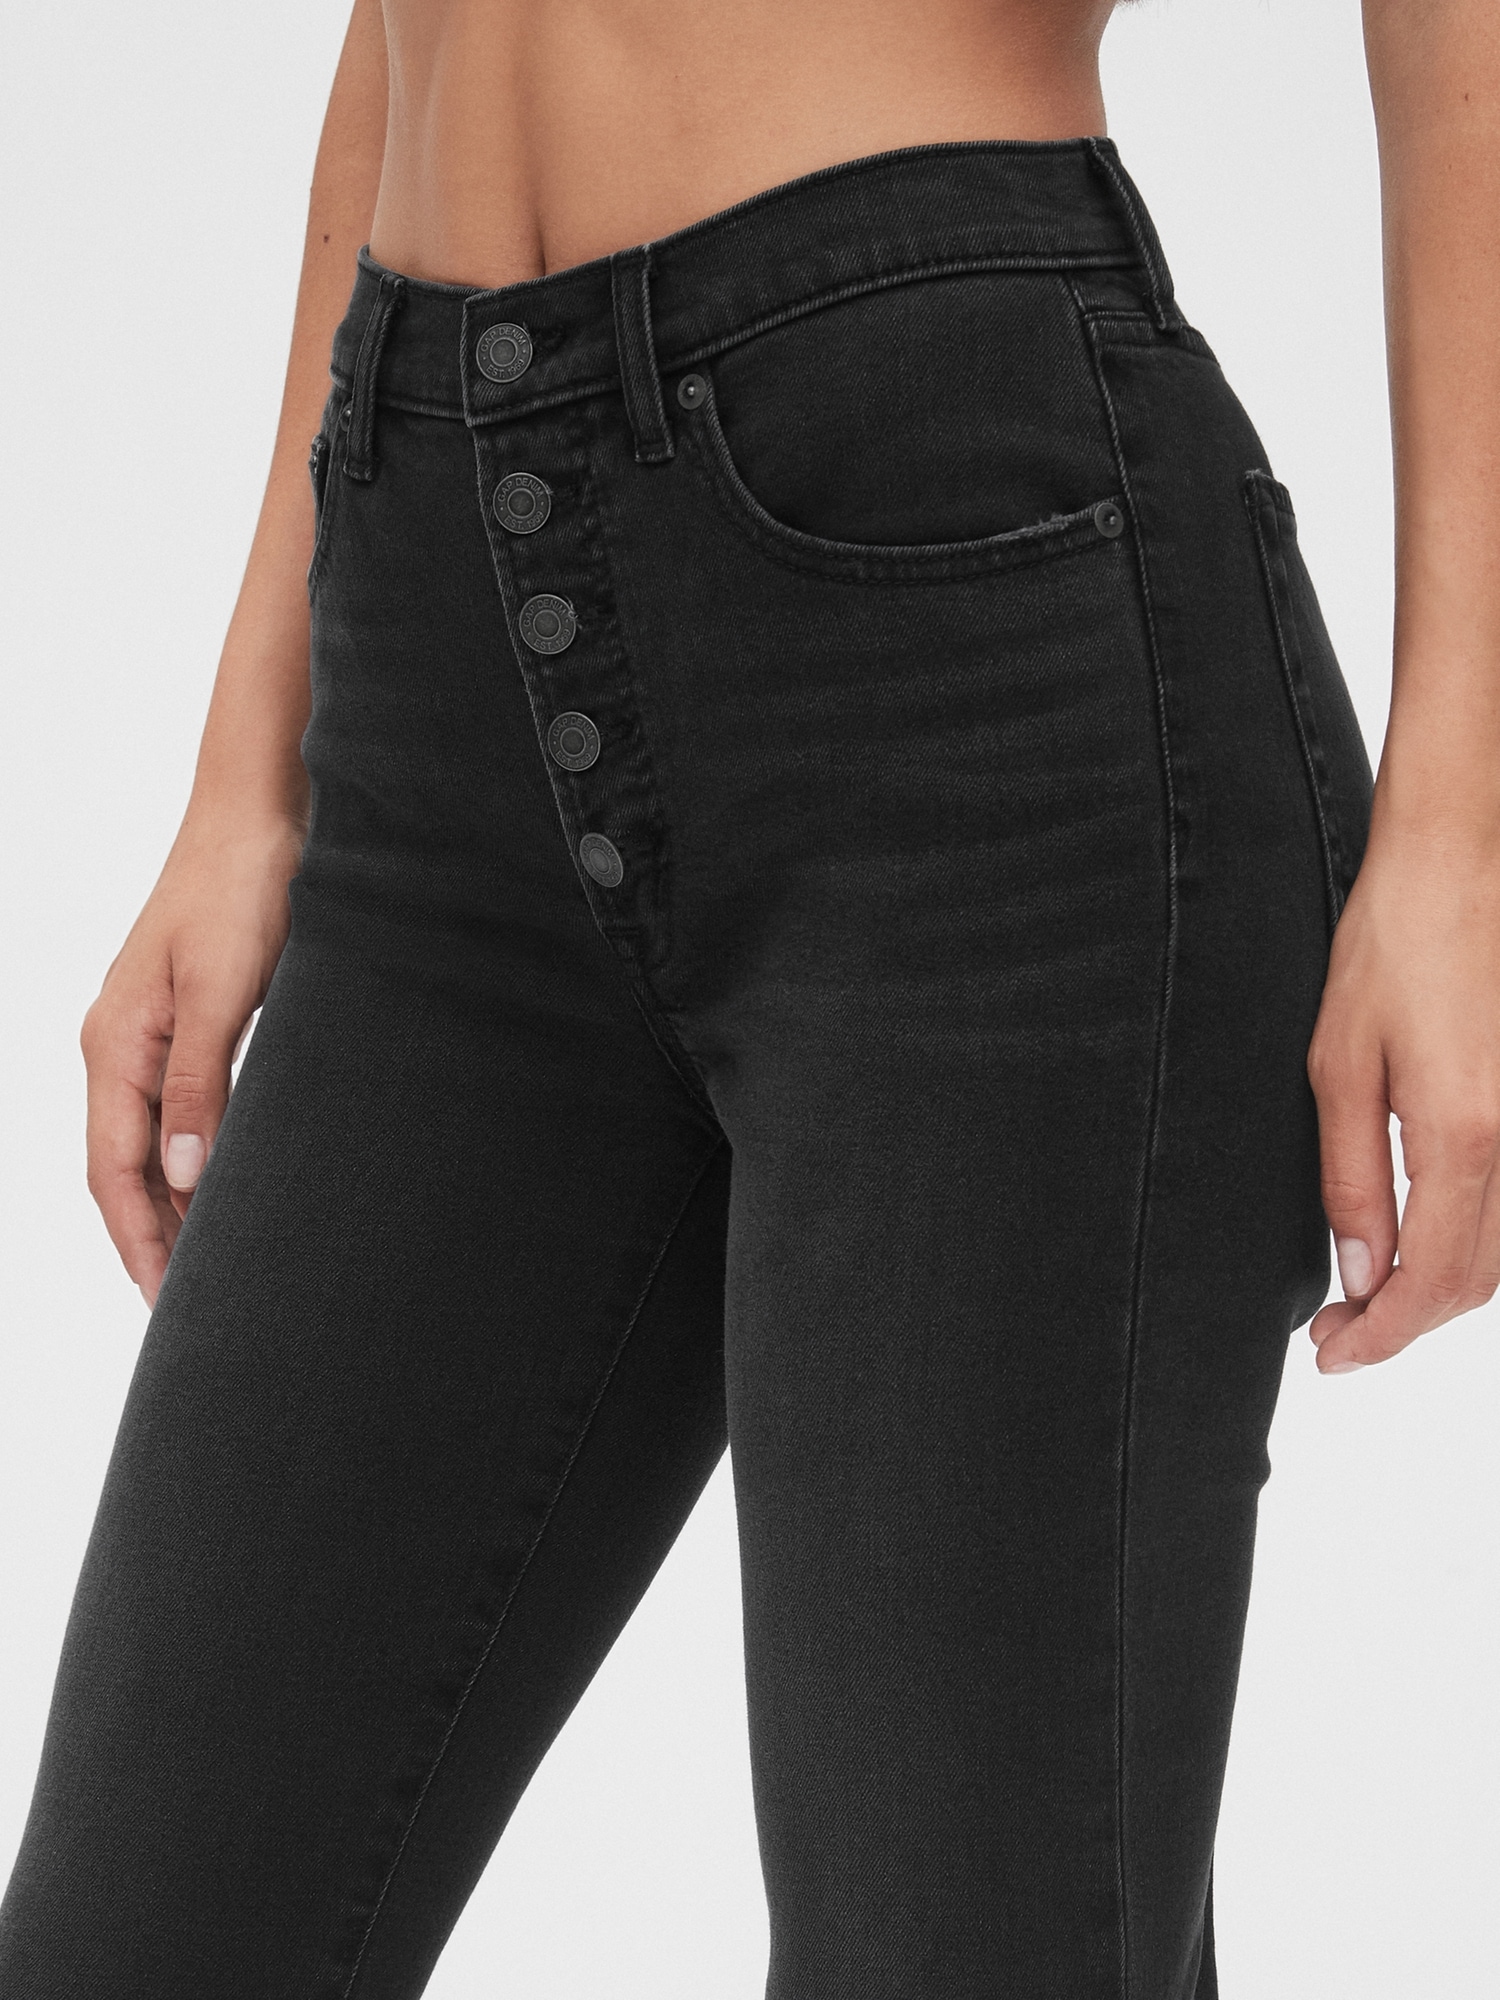 high waisted black jeans buttons